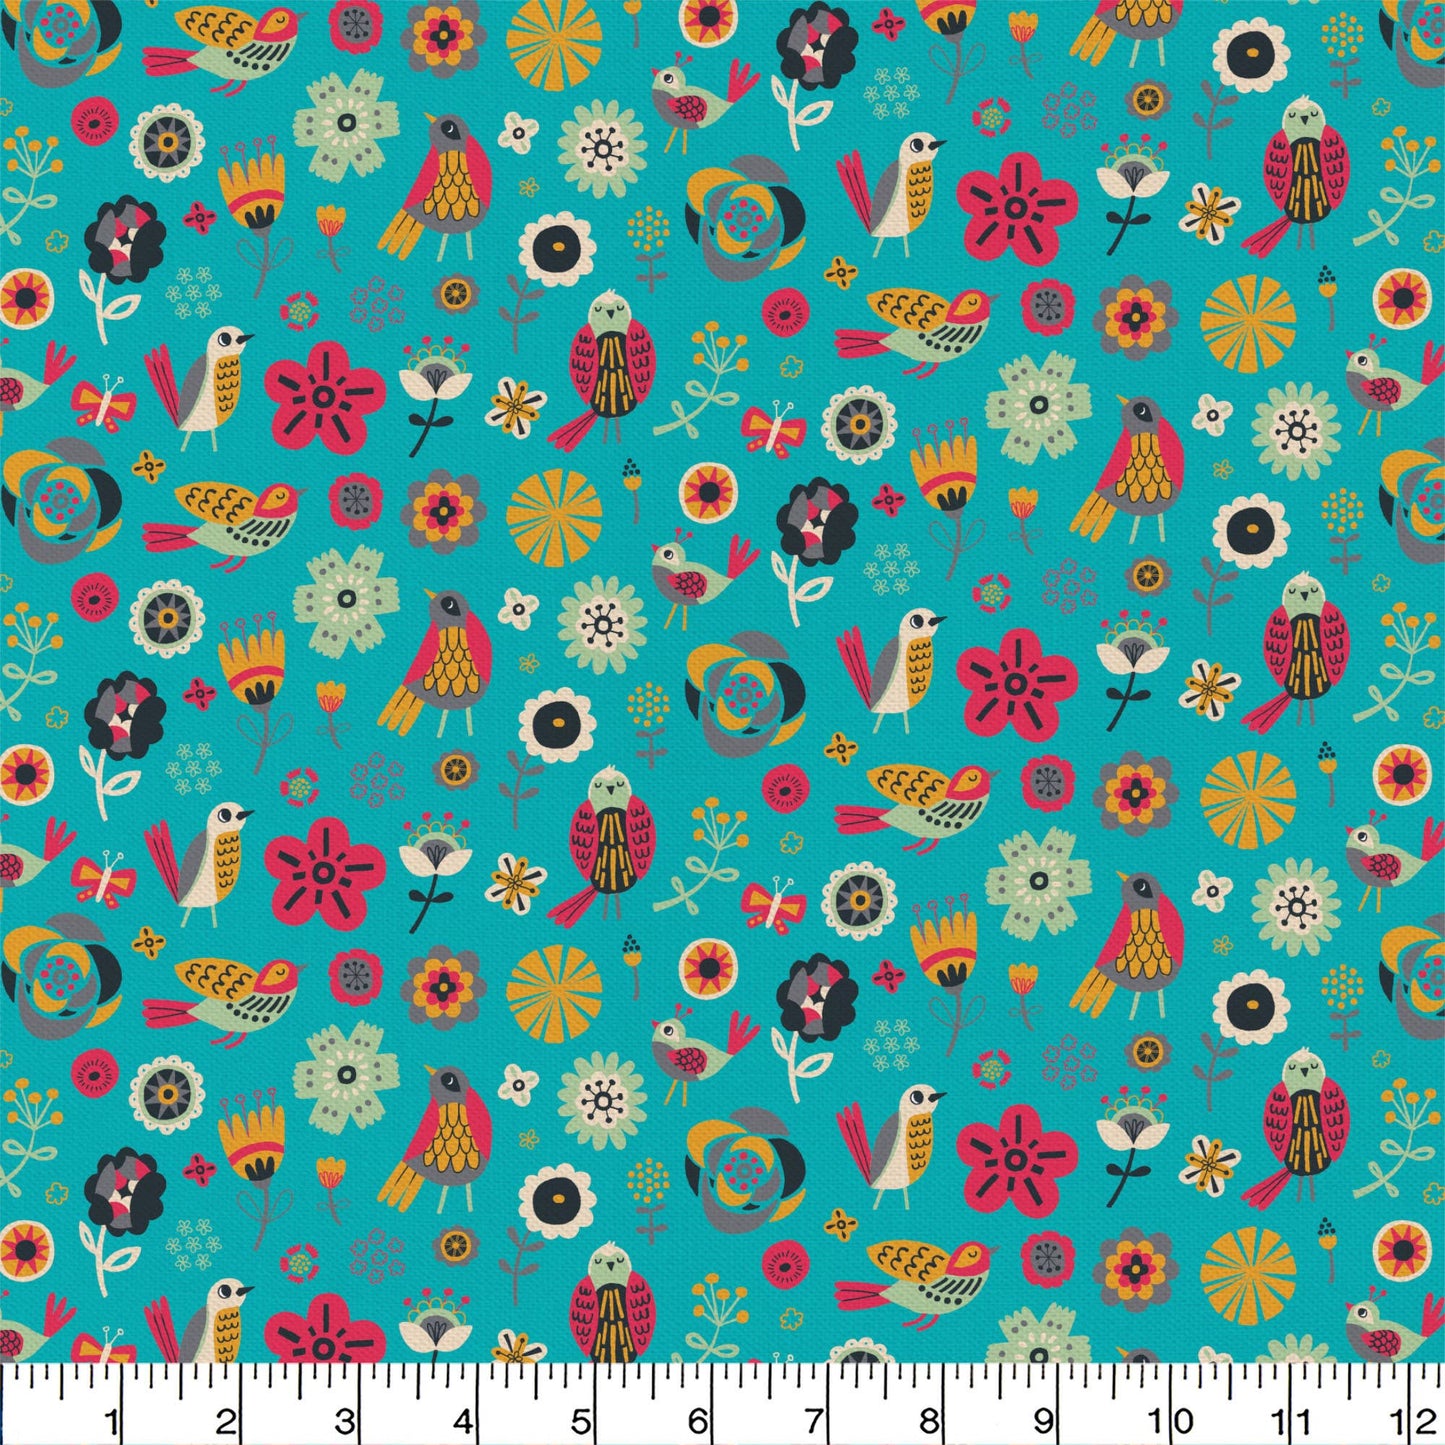 Emma & Mila Collection - Fabric by the Yards -Birds of a Feather - Birds & Flowers